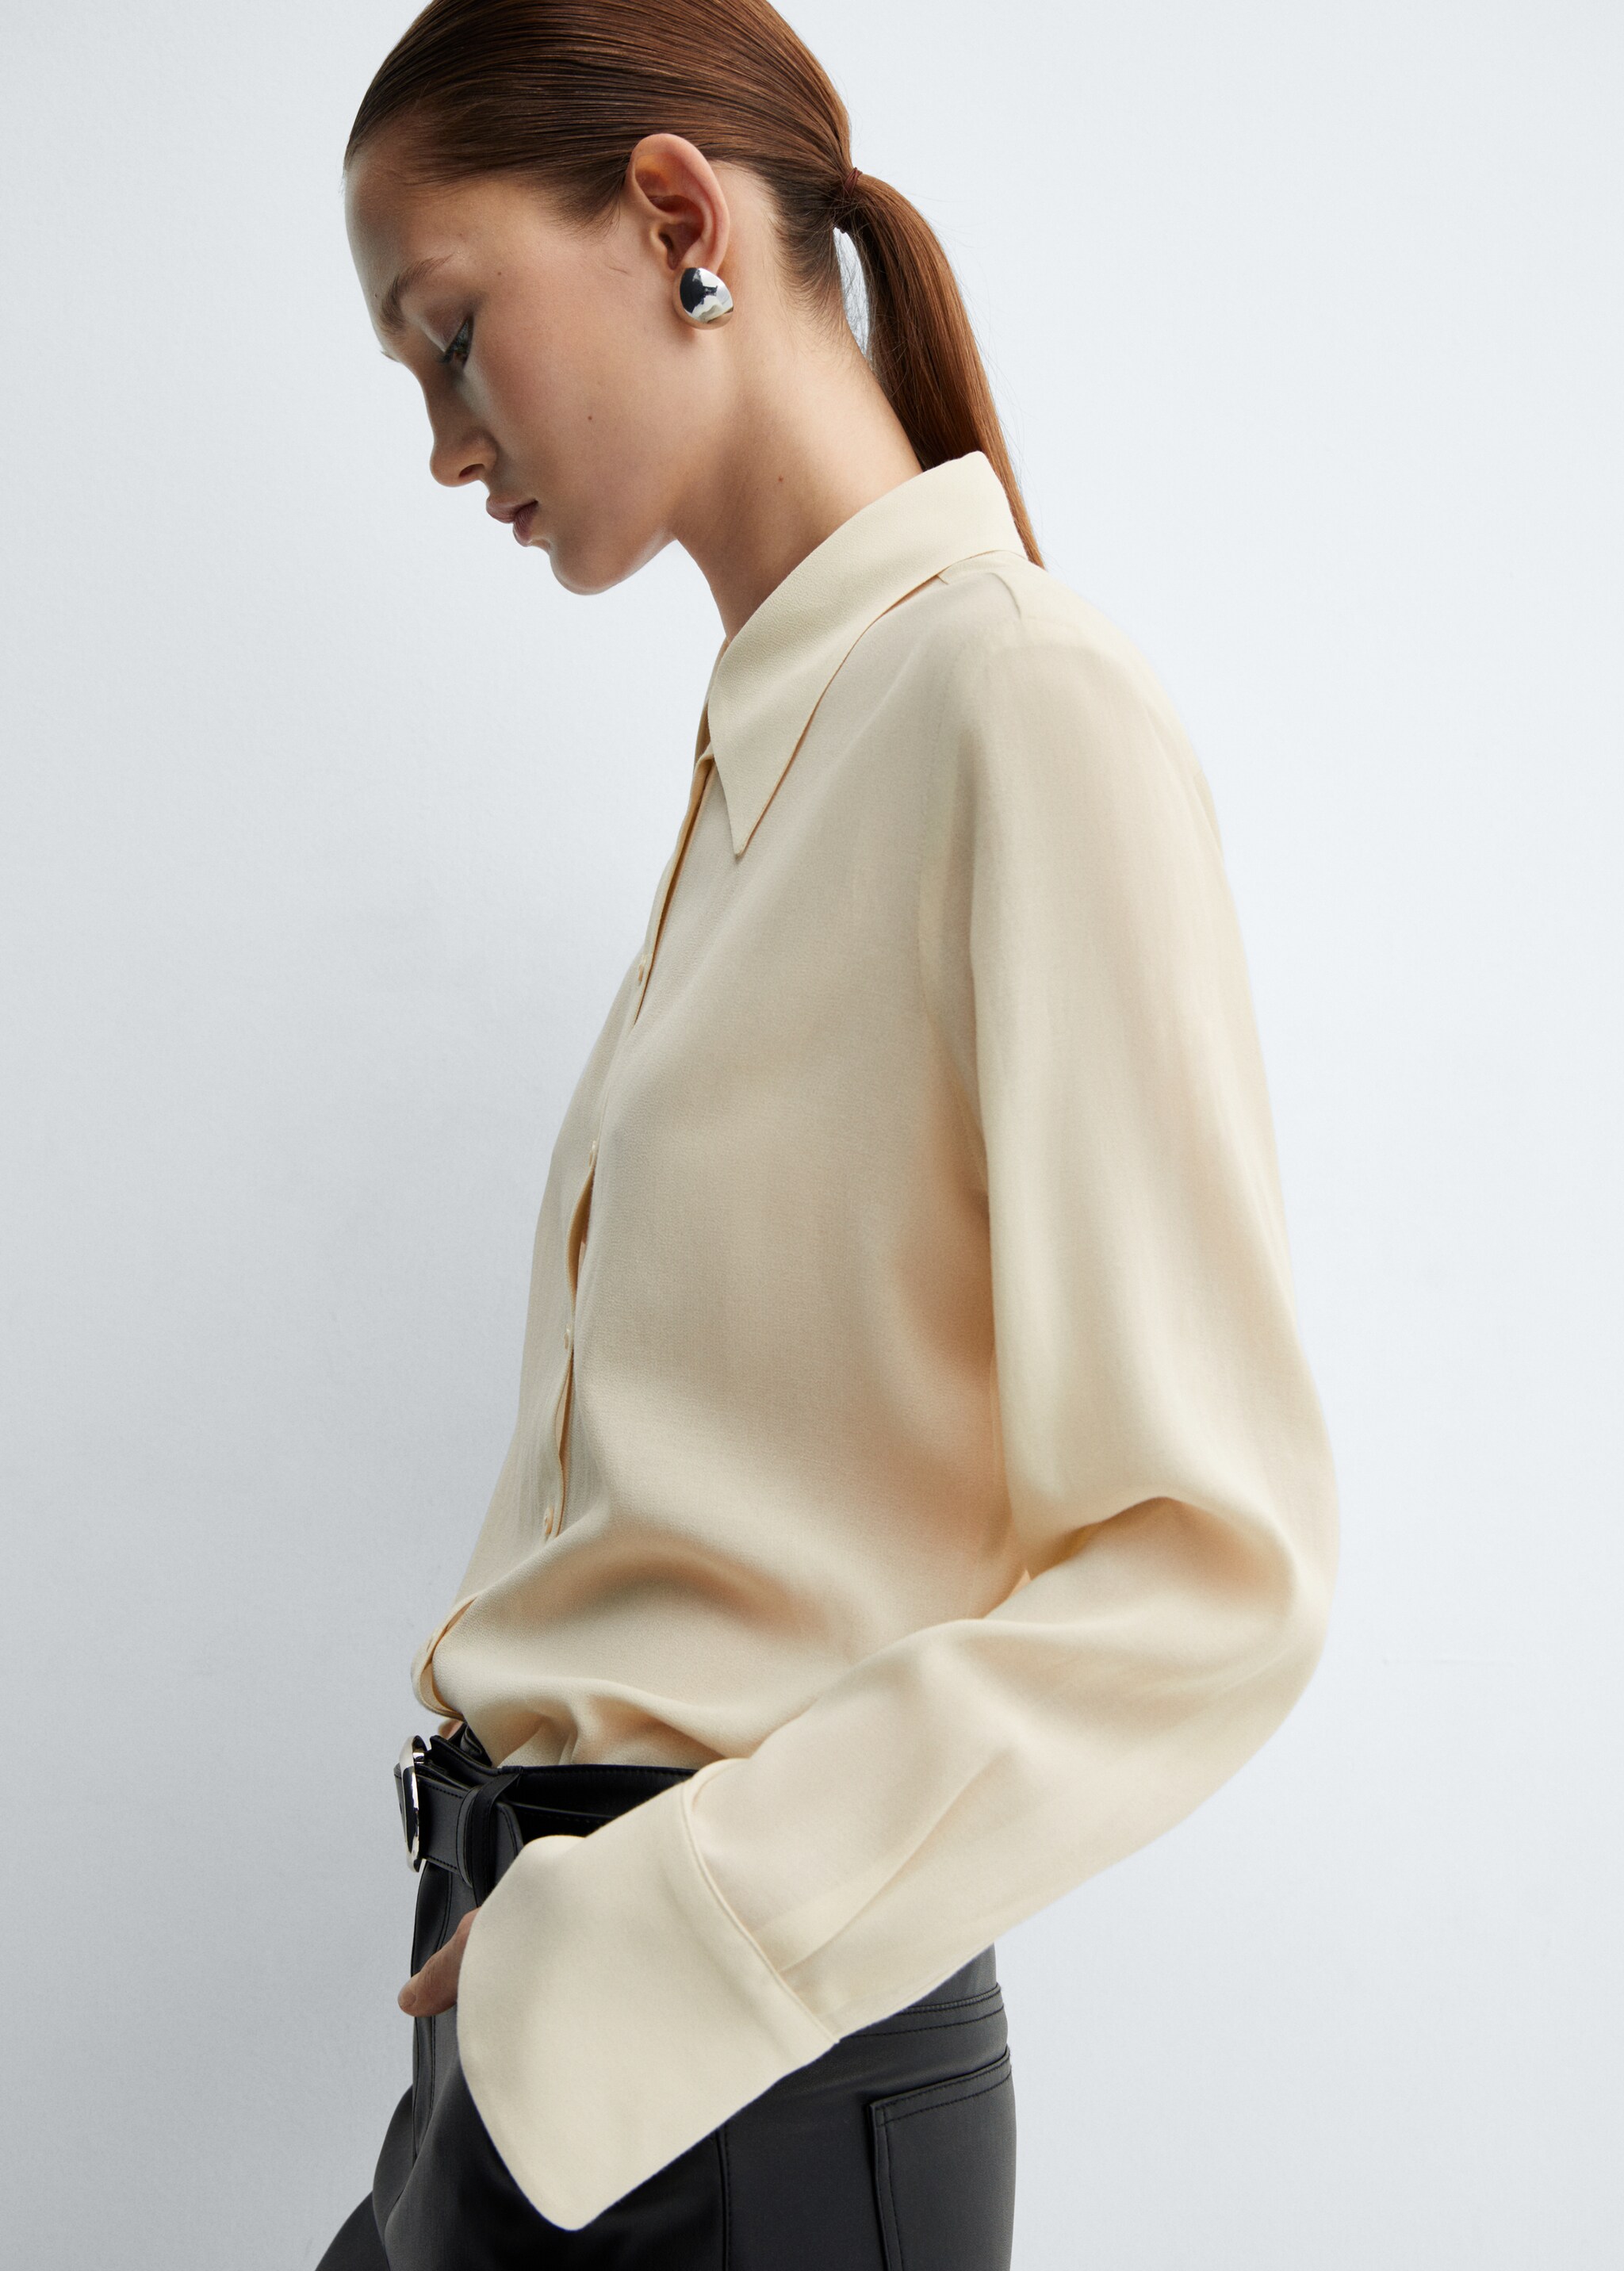 Buttoned flowy shirt - Details of the article 2